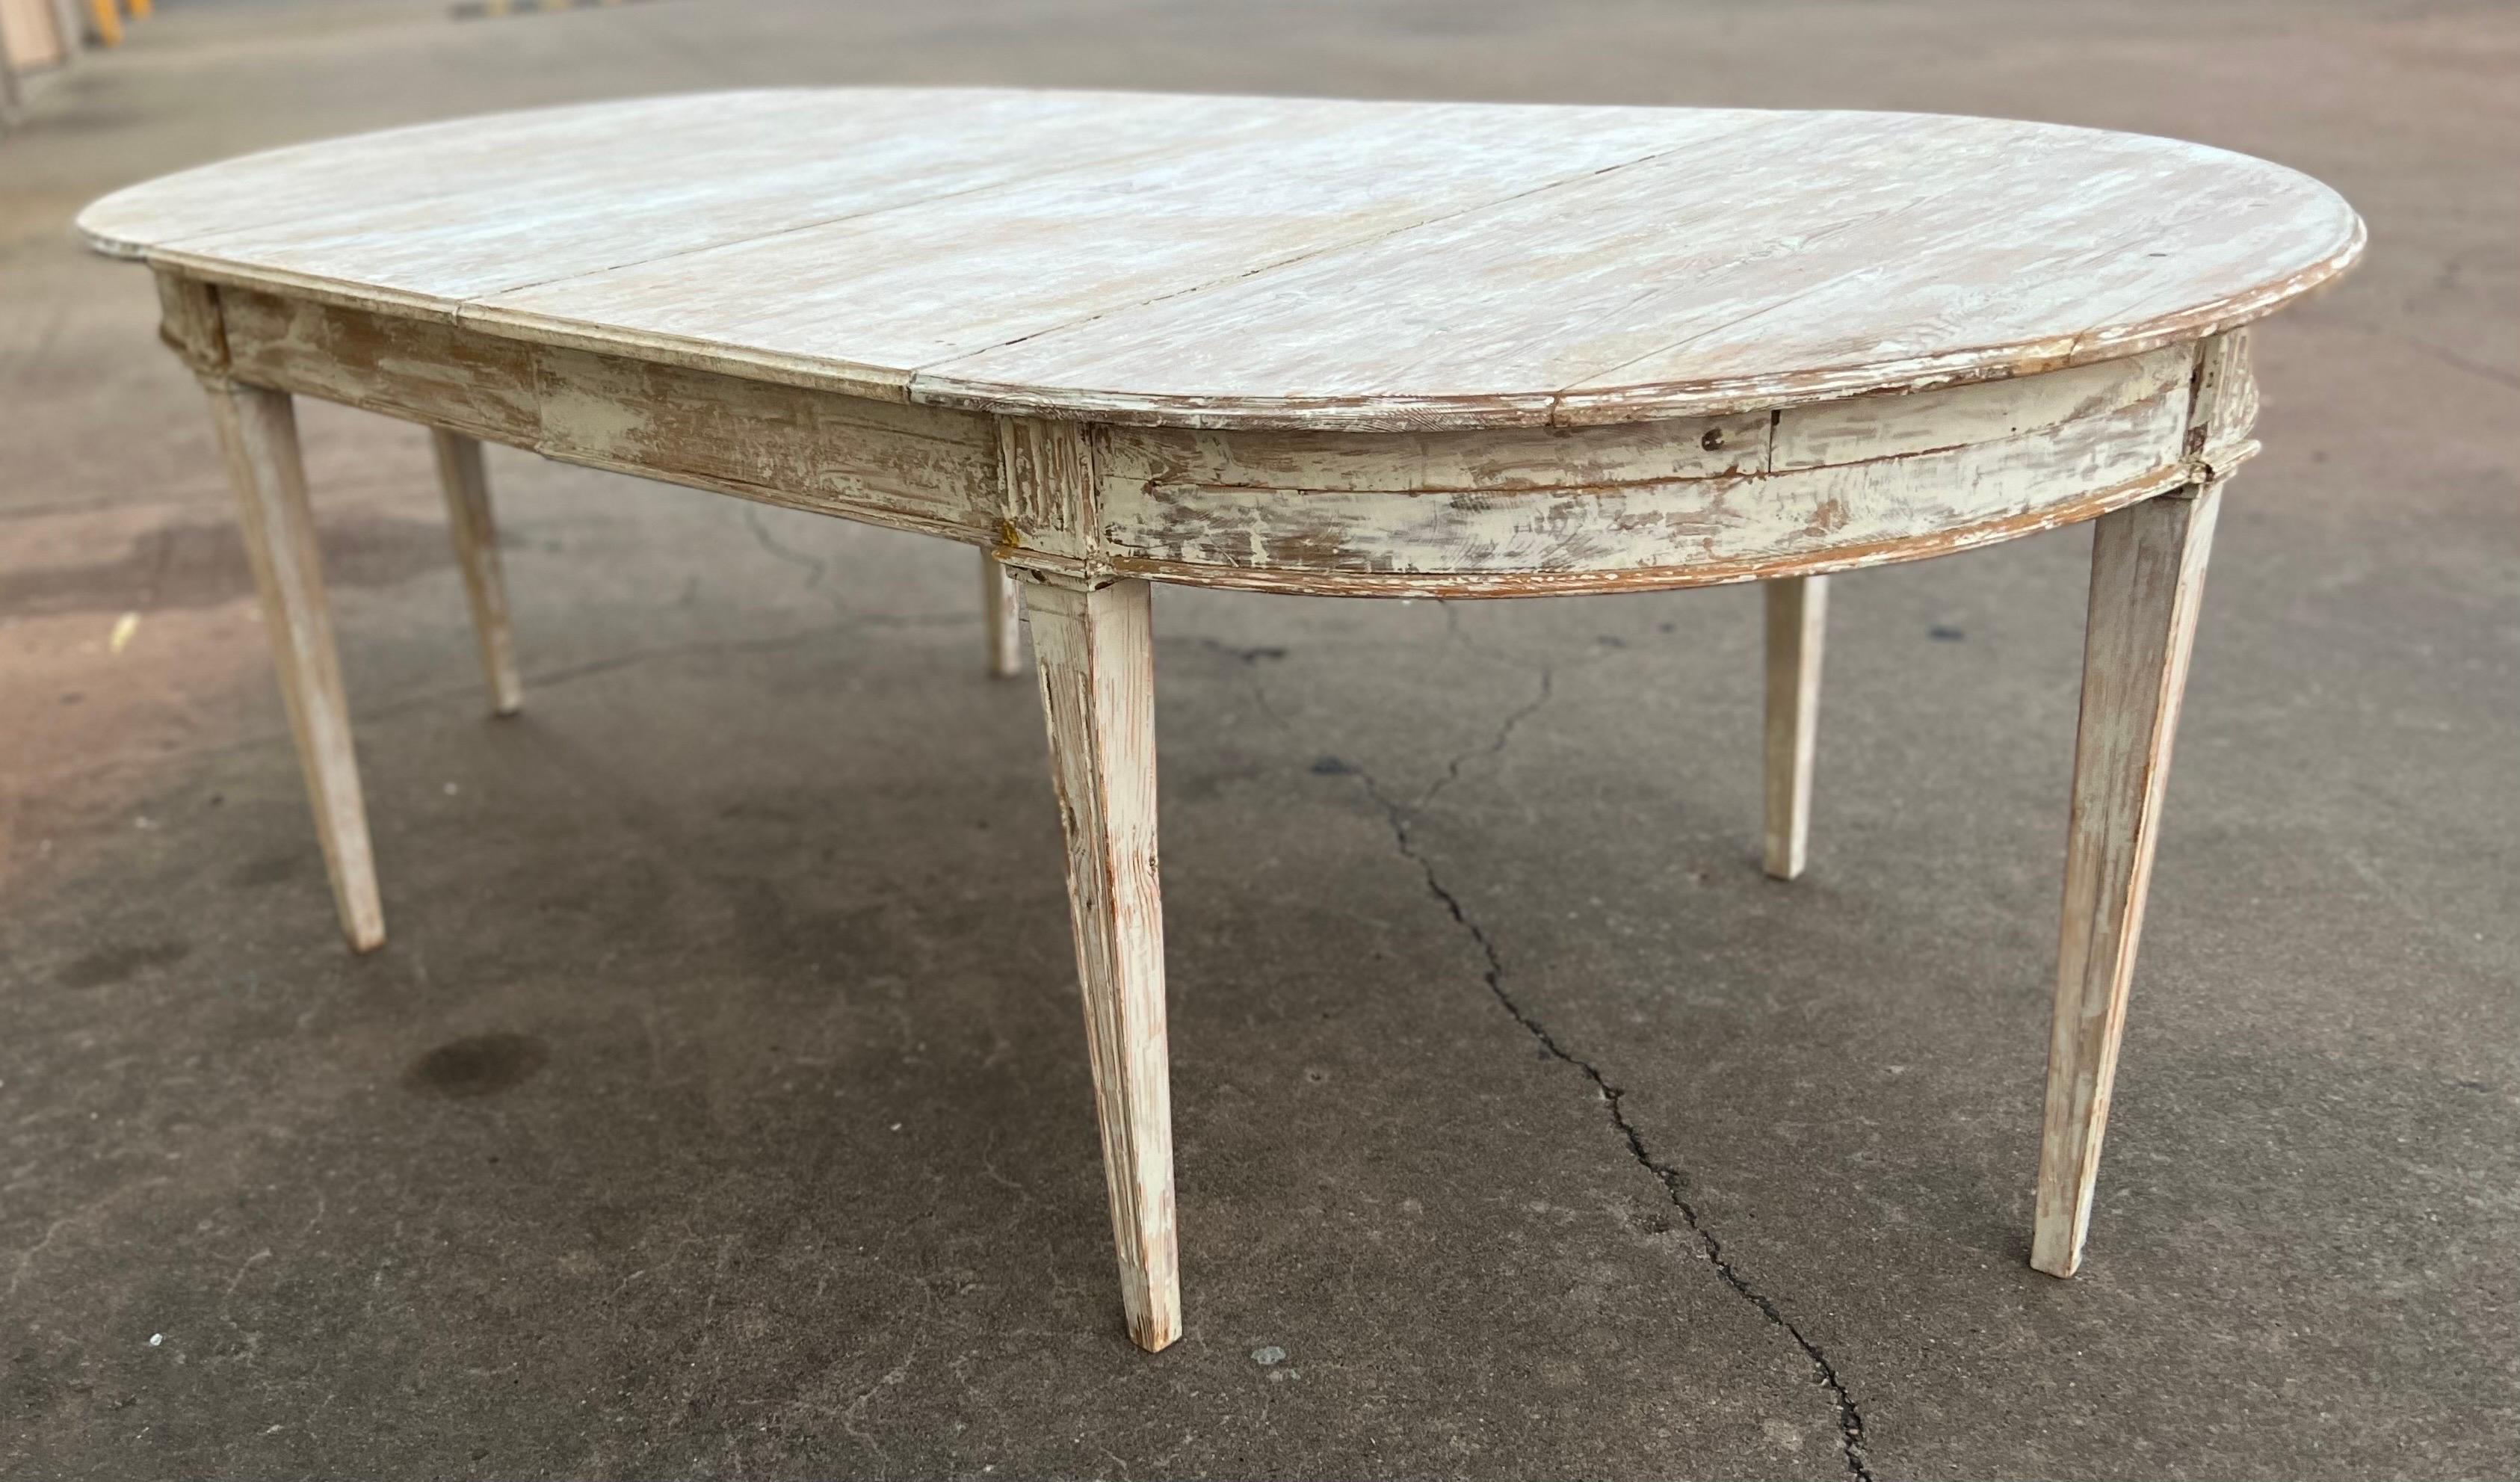 Stunning Swedish dining table that features two removable leaves. The leaves can be removed and the two ends come together as a small round table. Perfect for any area. Seats 6 to 8 comfortably. 

Dims when fully extended: 87.75w x 46.5d x